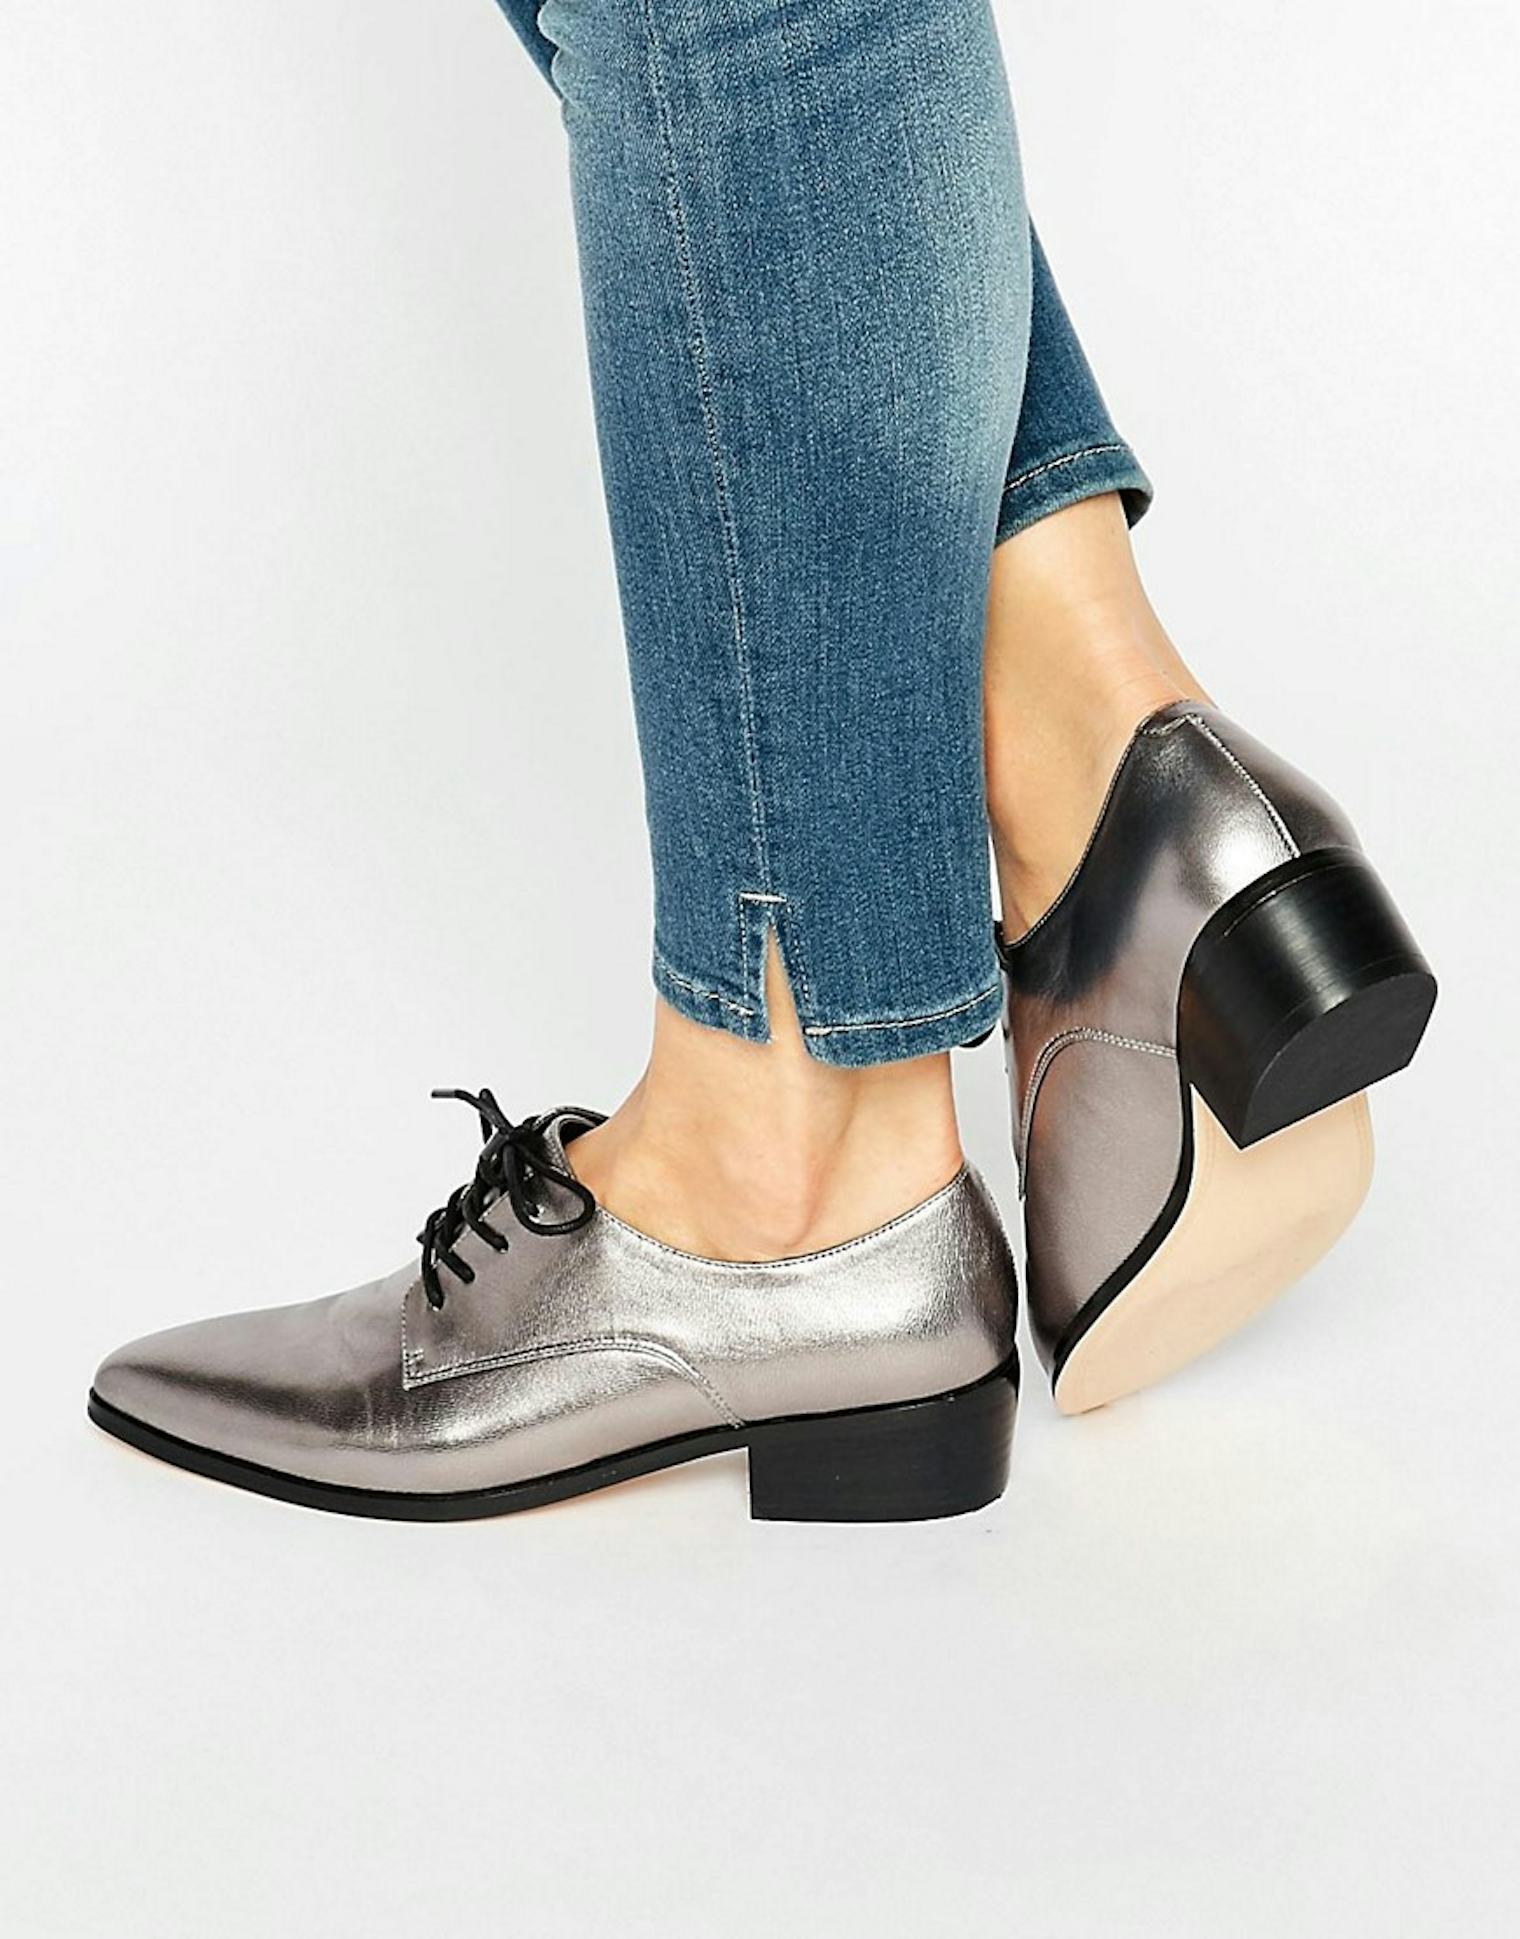 Metallic Shoes That Will Make Your Feet Feel Fancy